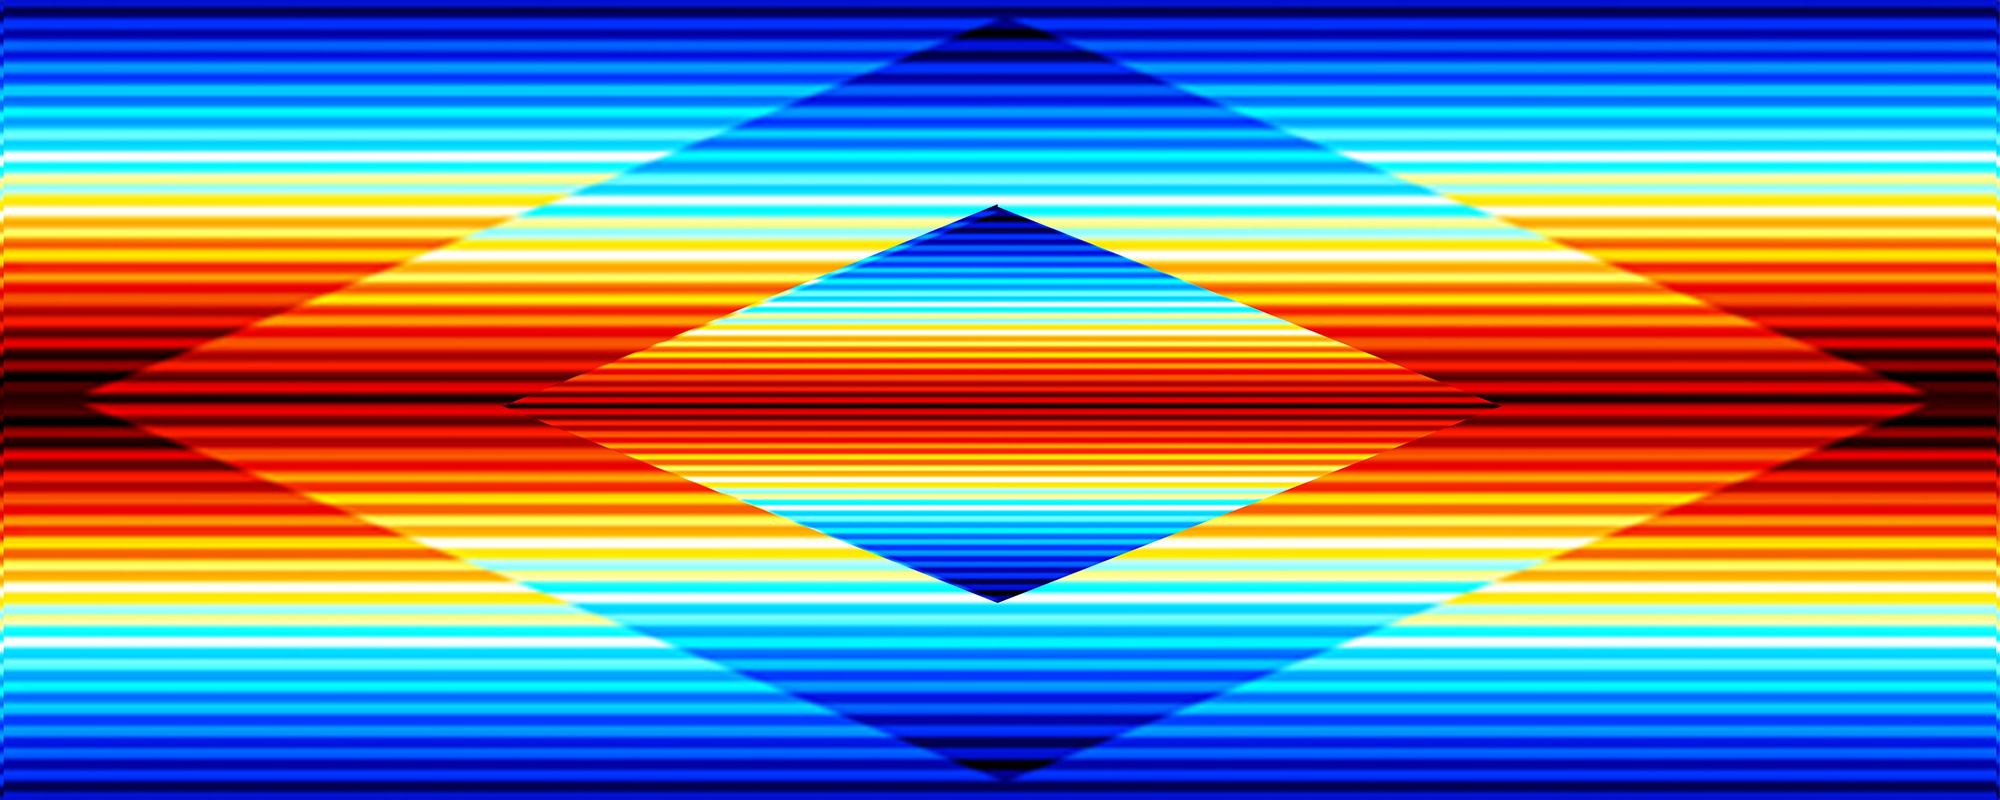 This artwork is a digital interpretation of a serape. It features a full spectrum of colors in a gradient from sky blue to deep red. The image is dominated by two concentric diamond shapes. Both of the diamonds, as well as the background, are composed of thin, layered, horizontal bands of color that shift from blue, to yellow, to red, to yellow again, and then back to blue.